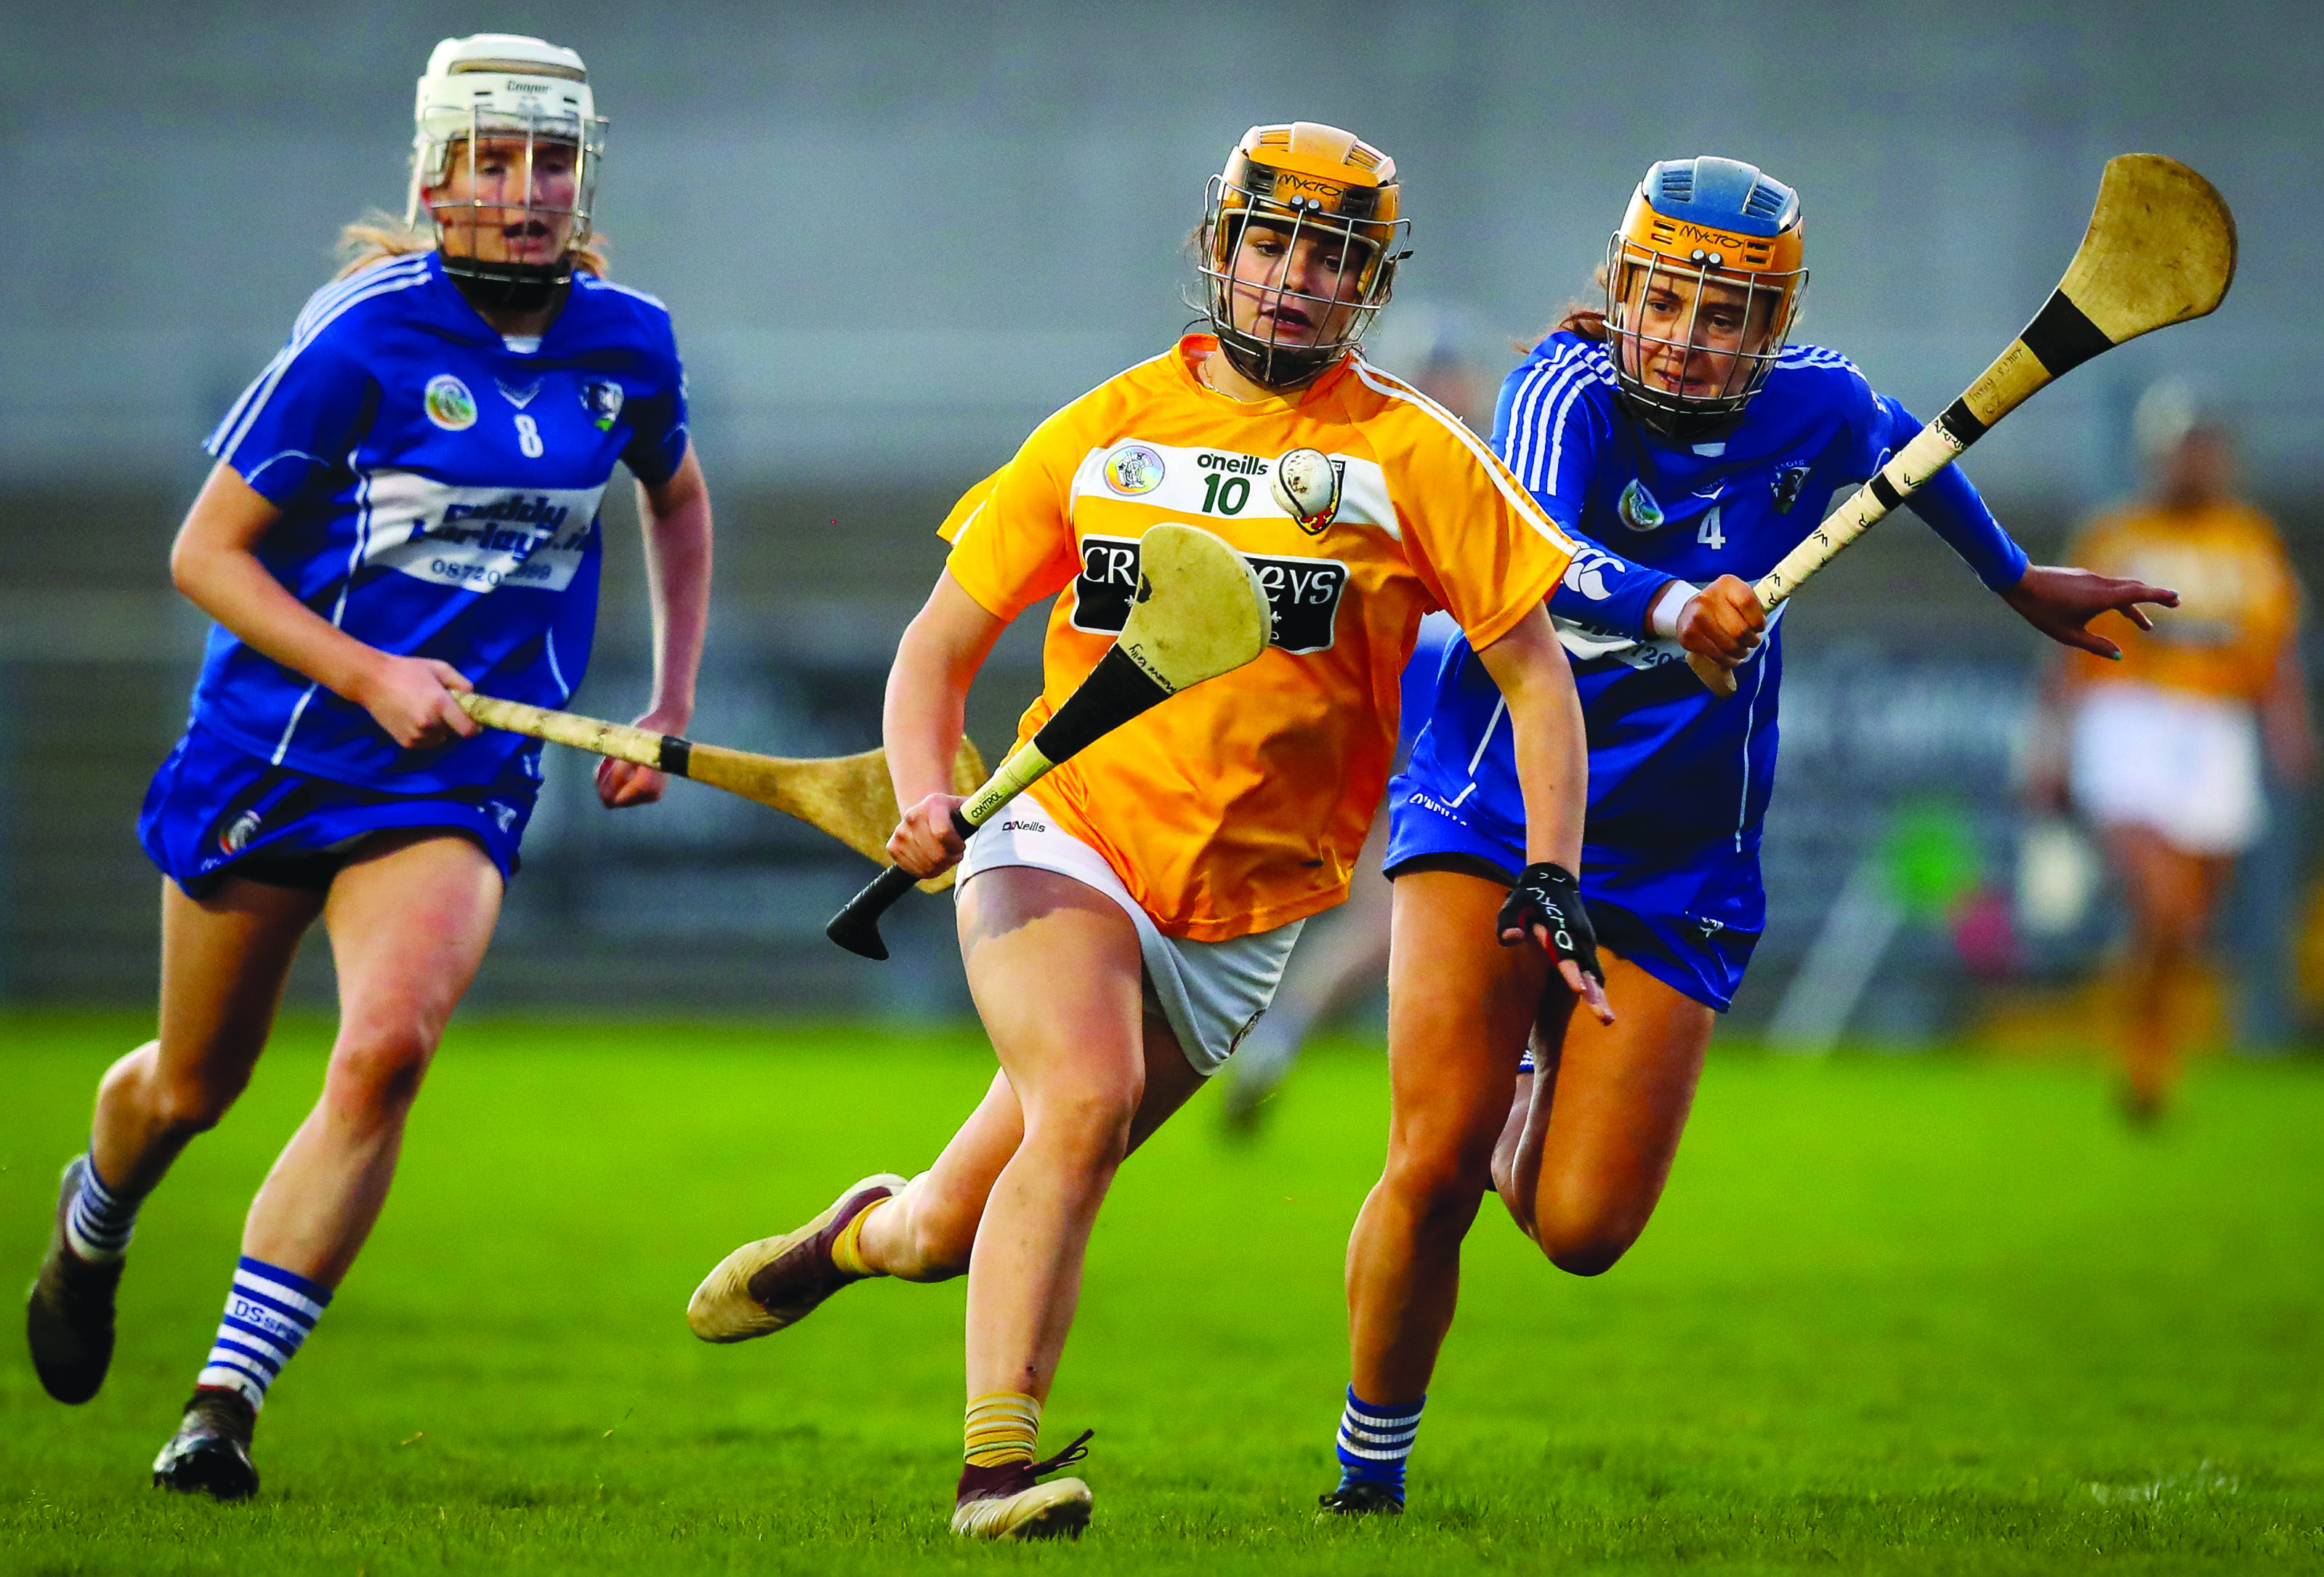 Antrim’s Maeve Kelly breaks free from Laura Finlay during the semi-final win over Laois. The Saffrons bid for All-Ireland glory on Saturday when they take on Down at Kingspan Breffni Park 